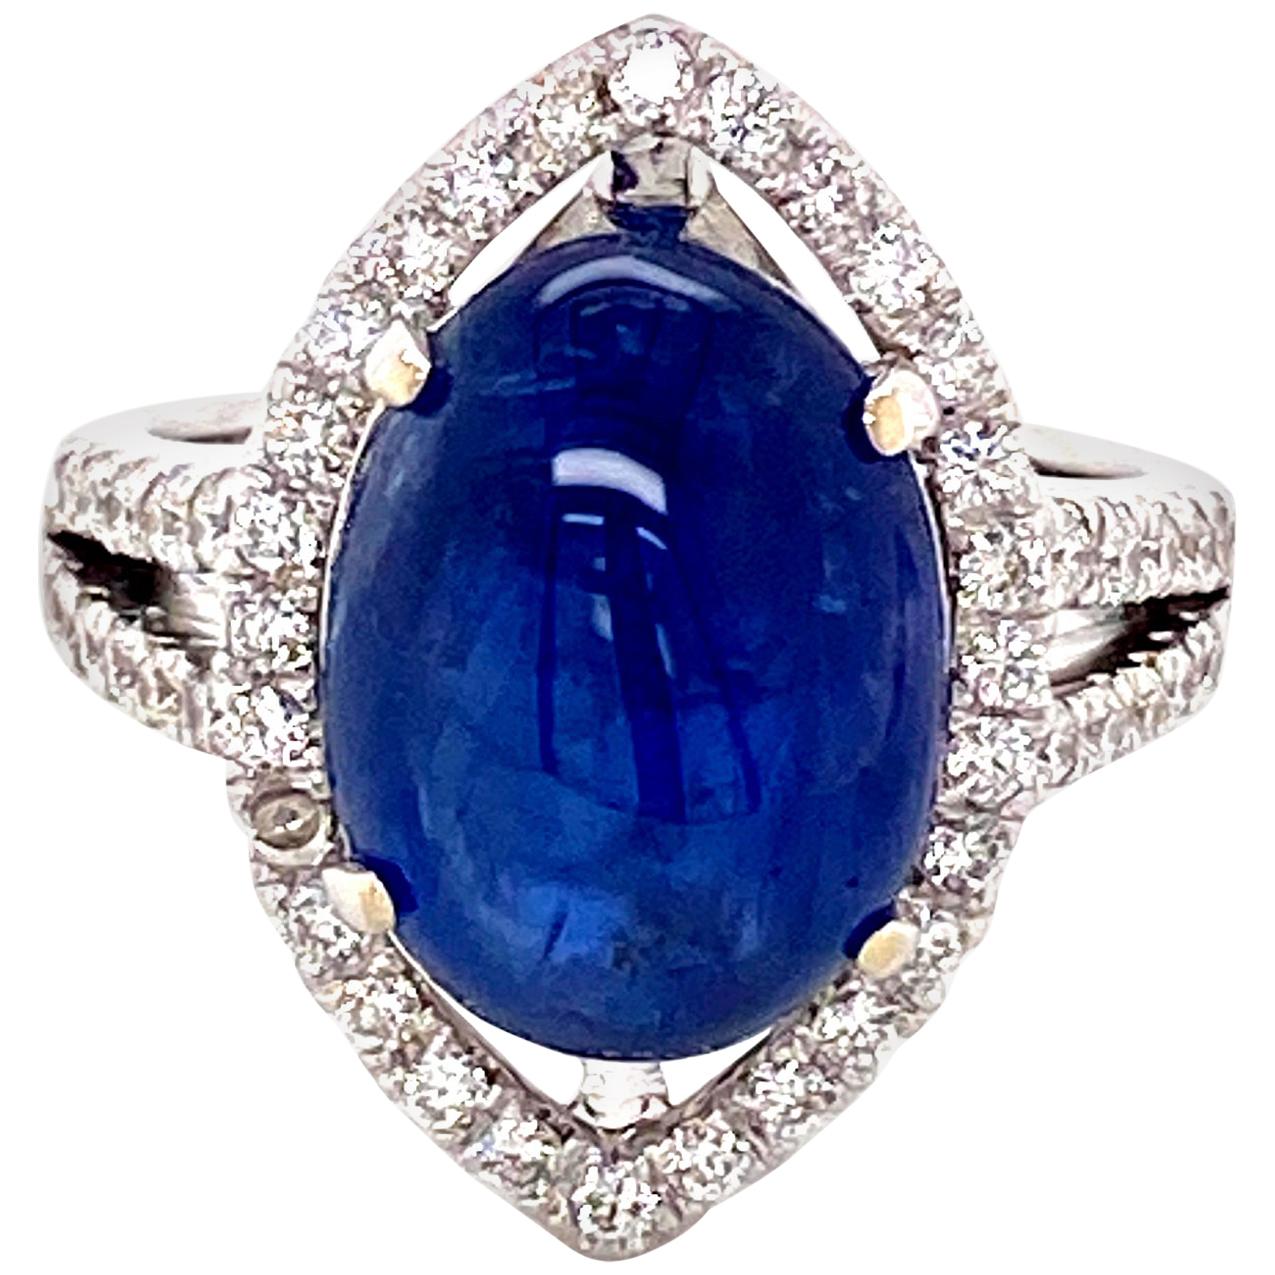 8.63 Carat GRS Certified Unheated Burmese Sapphire and White Diamond Engagement Ring:

An elegant ring, it features a beautiful unheated Burmese blue sapphire cabochon weighing 8.63 carat, certified by GRS Lab, and surrounded by white round